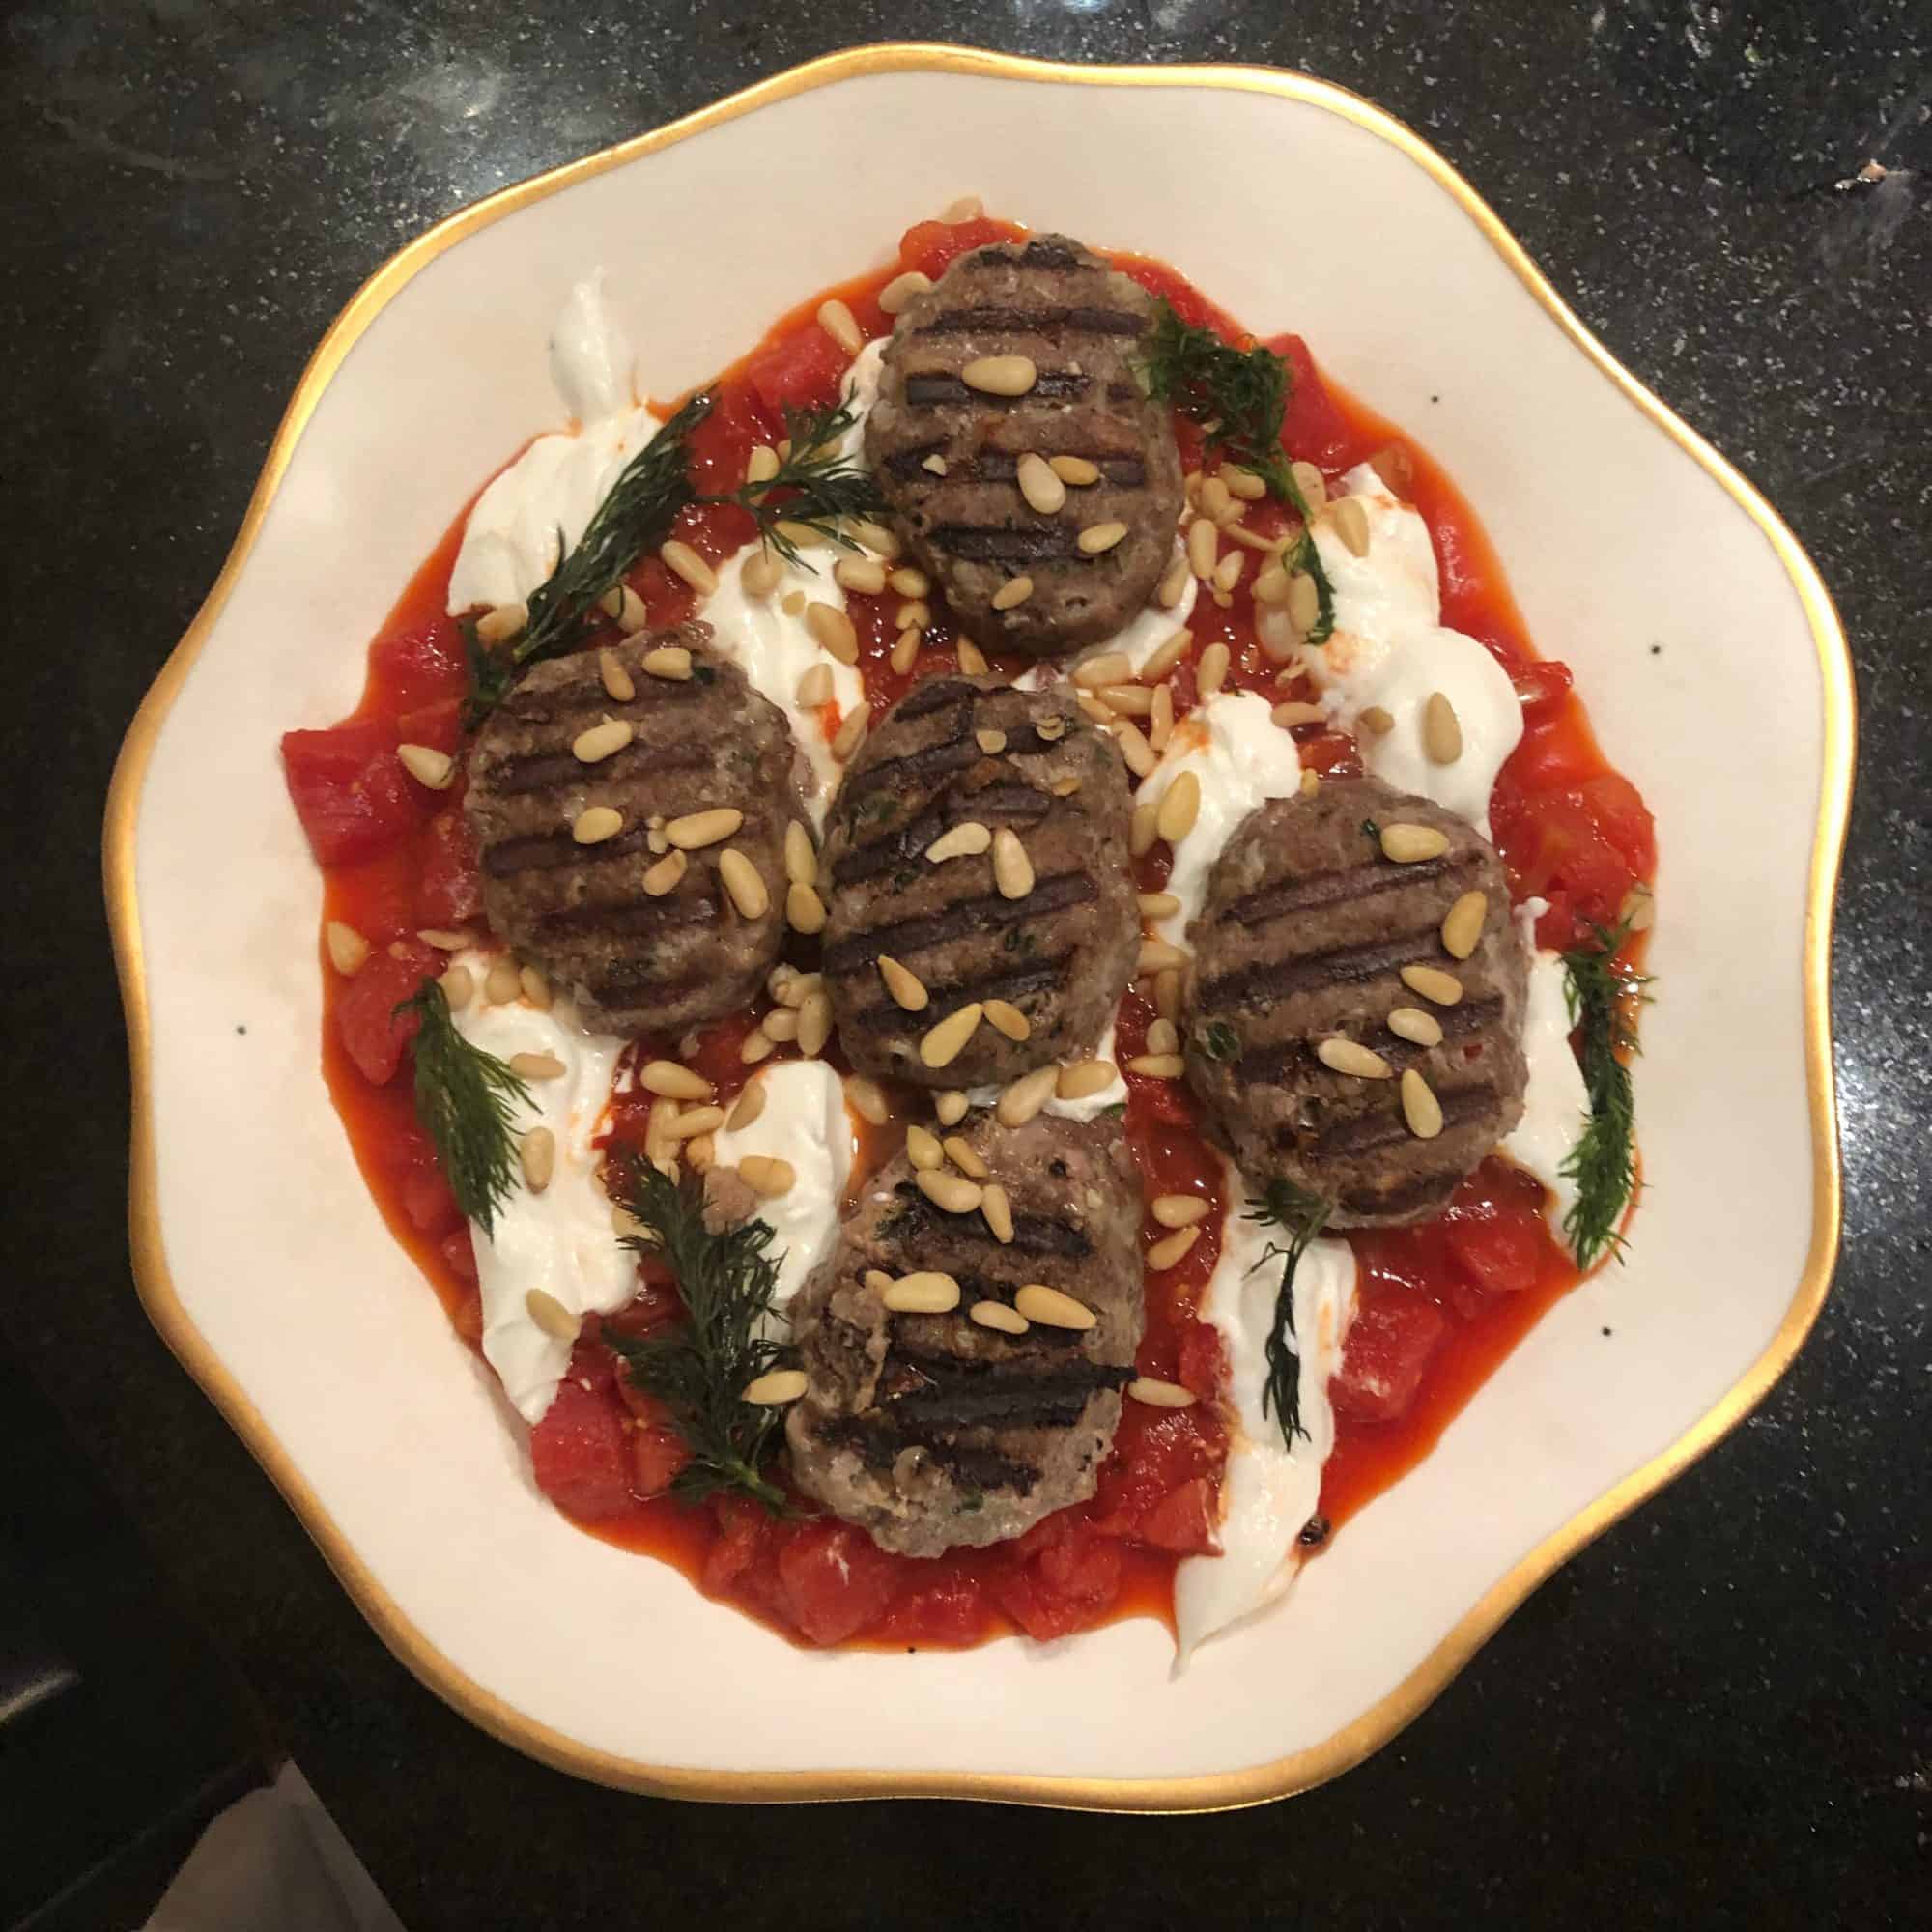 Lamb and Beef Kofte with Spicy Tomato Sauce